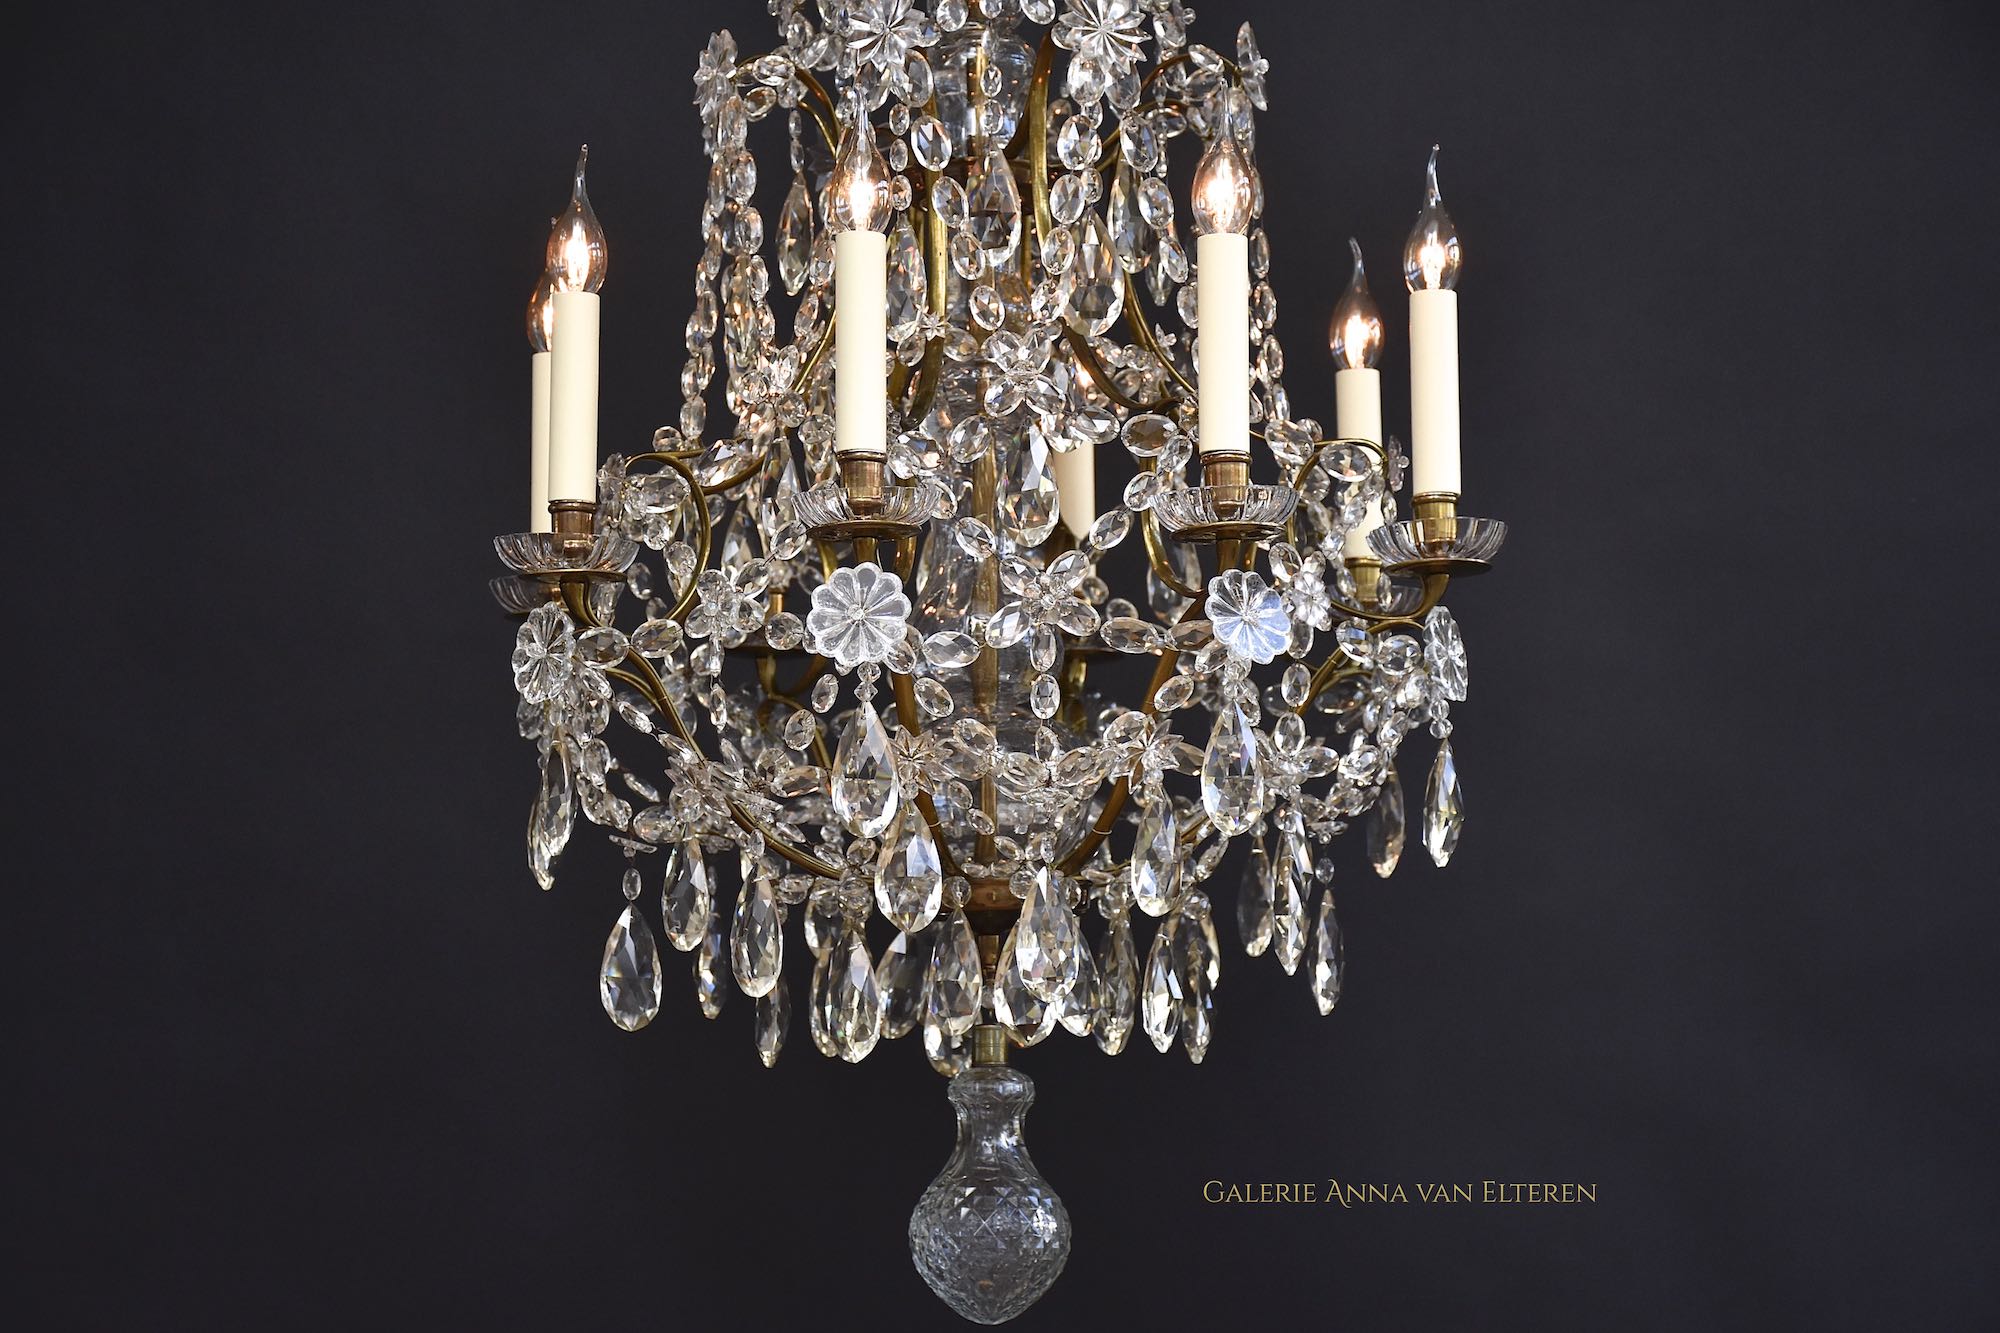 Large 19th c. Rococo style antique chandelier